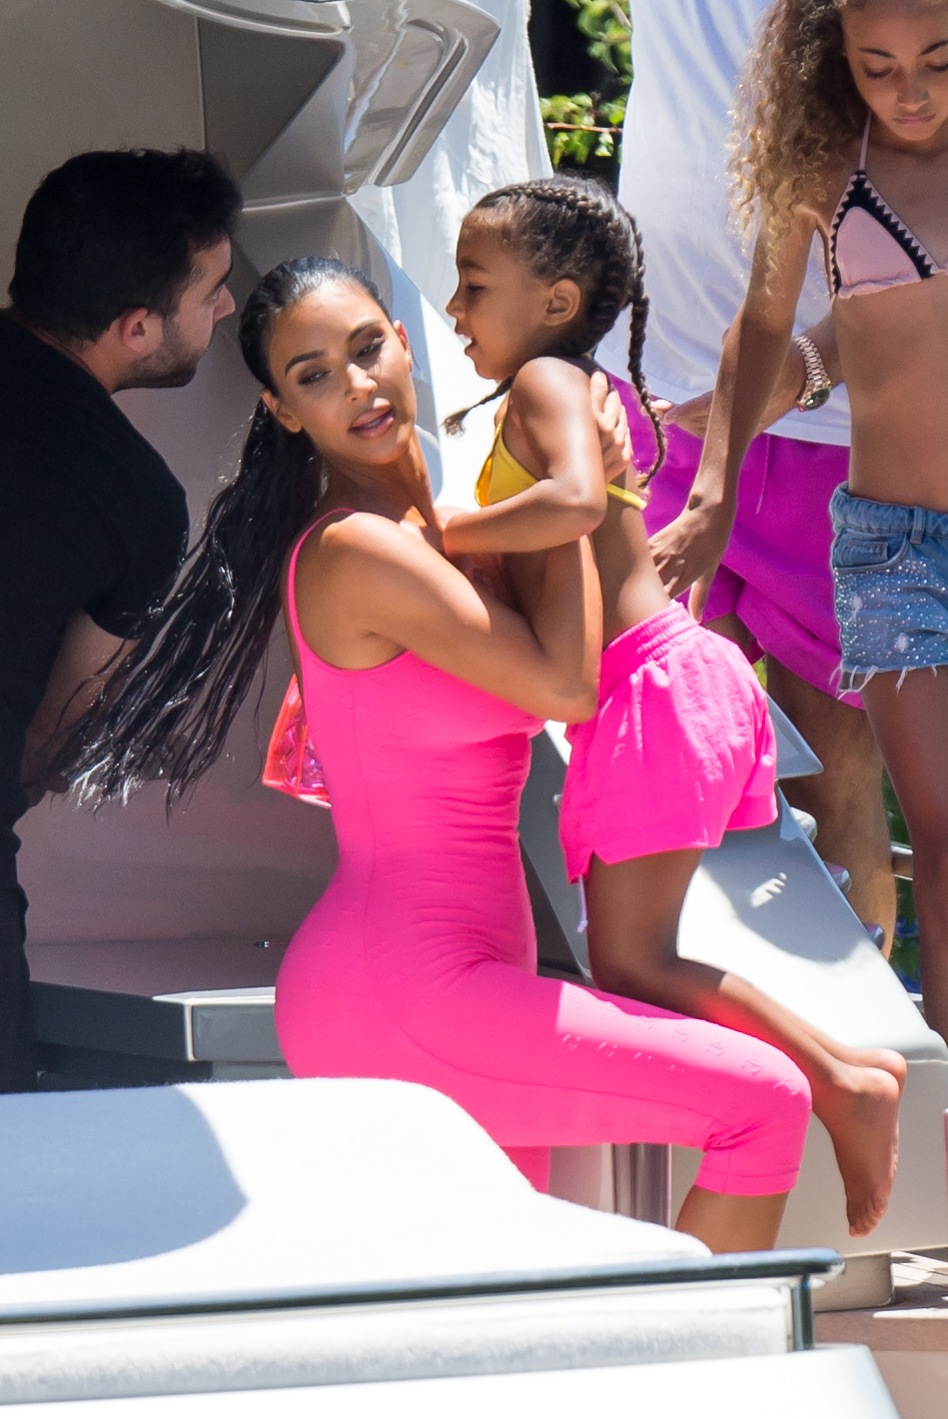 Kim Kardashian curves vintage hot pink Chanel onesie Miami boat trip. cute kids North and Saint, OG crew Jonathan Cheban and Larsa Pippen. Dave Grutman's 'Groot boat Larsa's  daughter Sophia Pippen, ABC's Dancing With The Stars: Juniors.